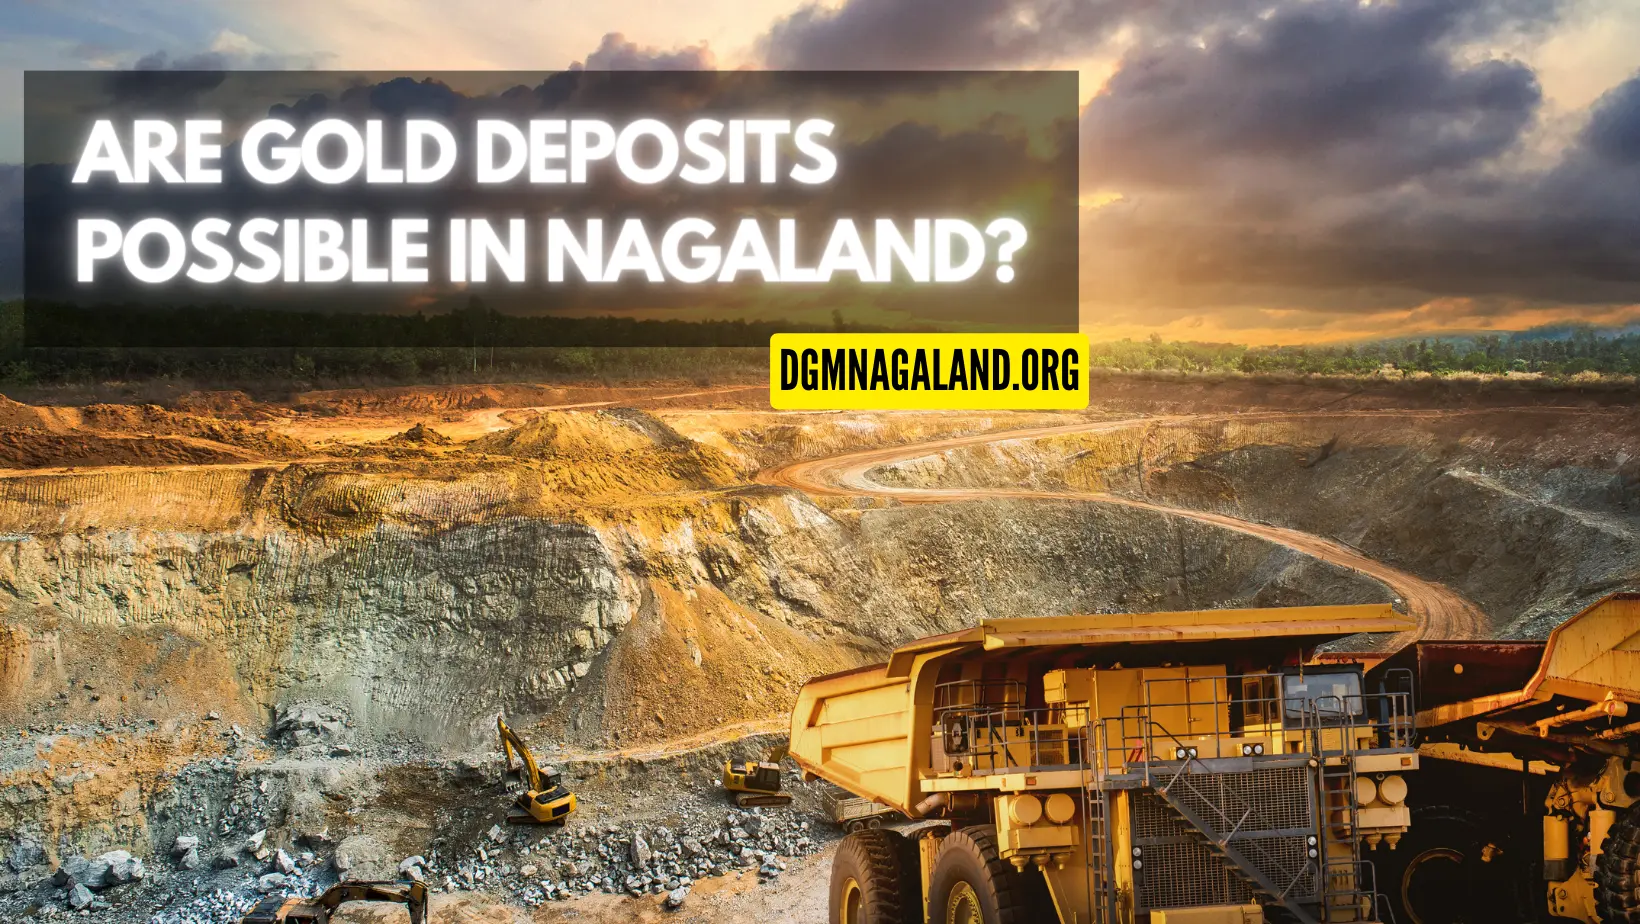 Are Gold Deposits Possible in Nagaland?